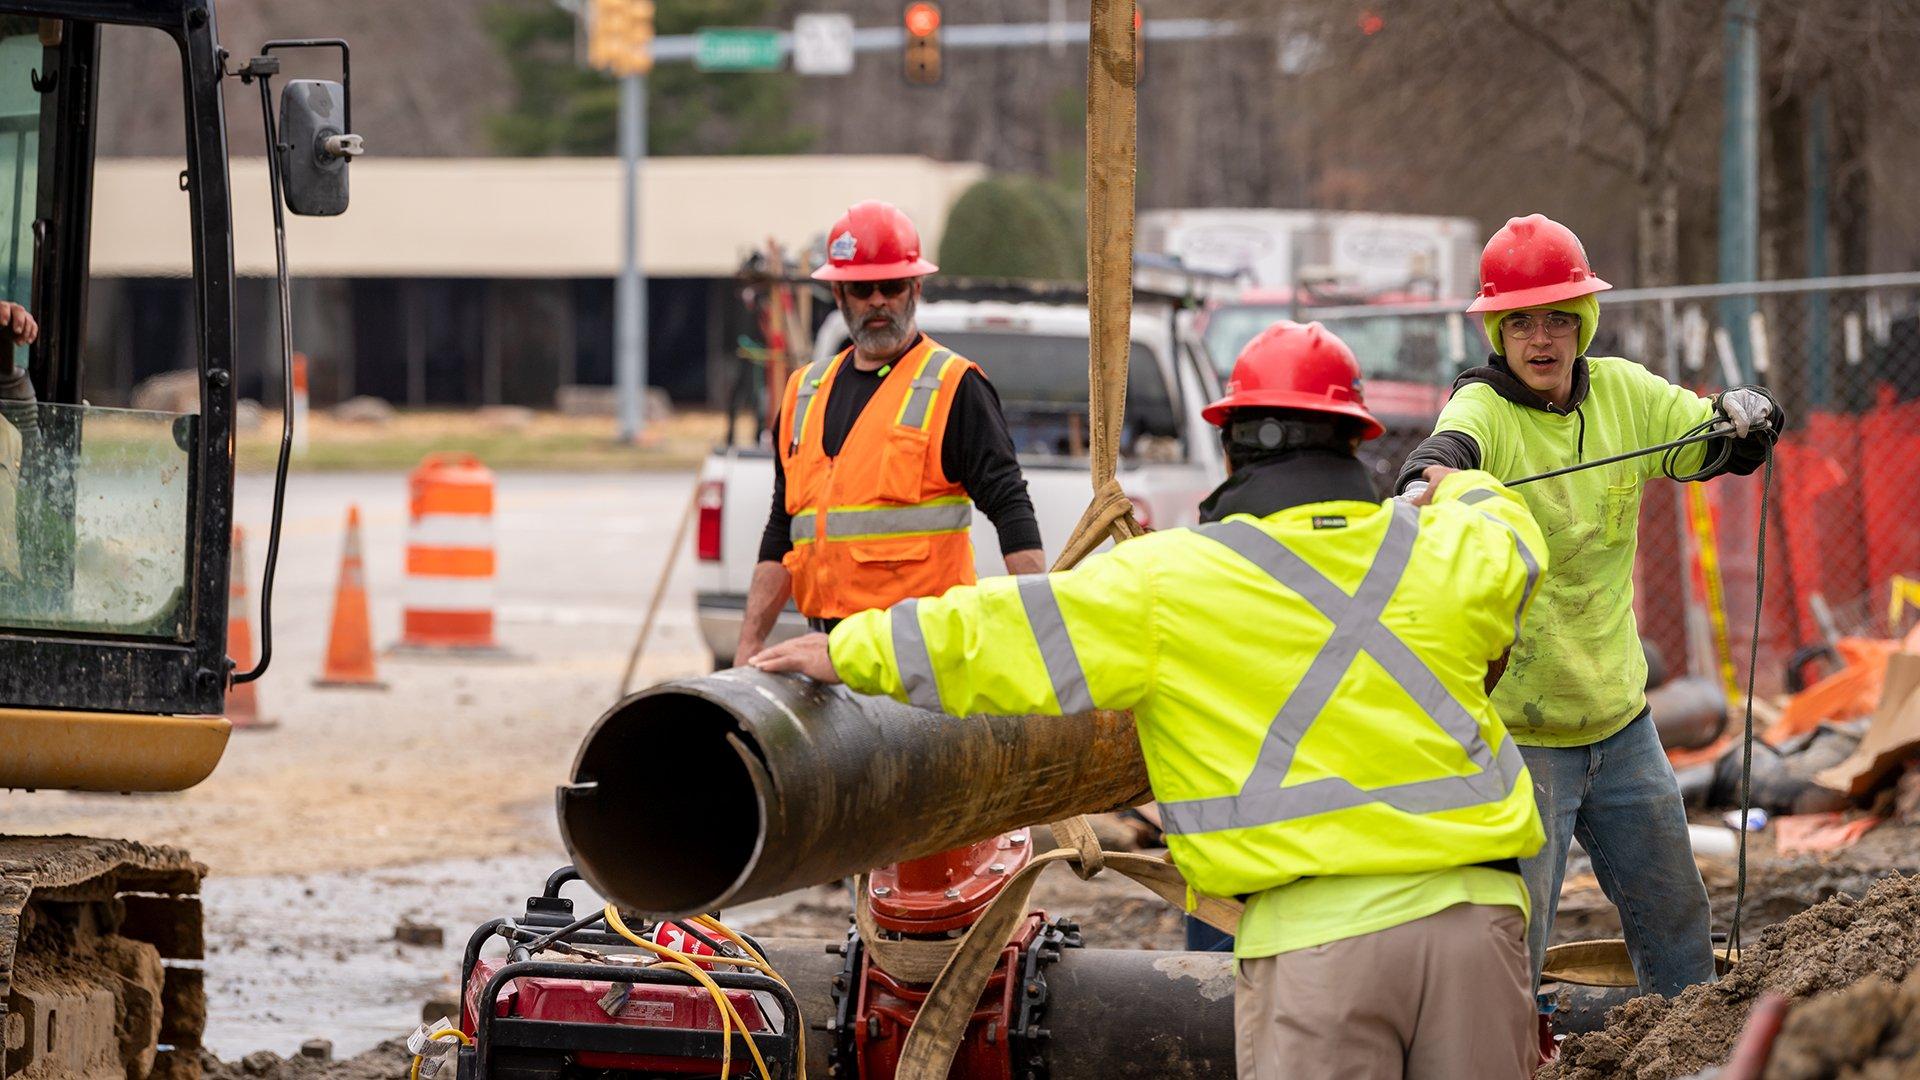 Two workers wearing hard hats and reflective gear maneuver an underground pipe on a jobsite by a public road while a supervisor looks on in the background.